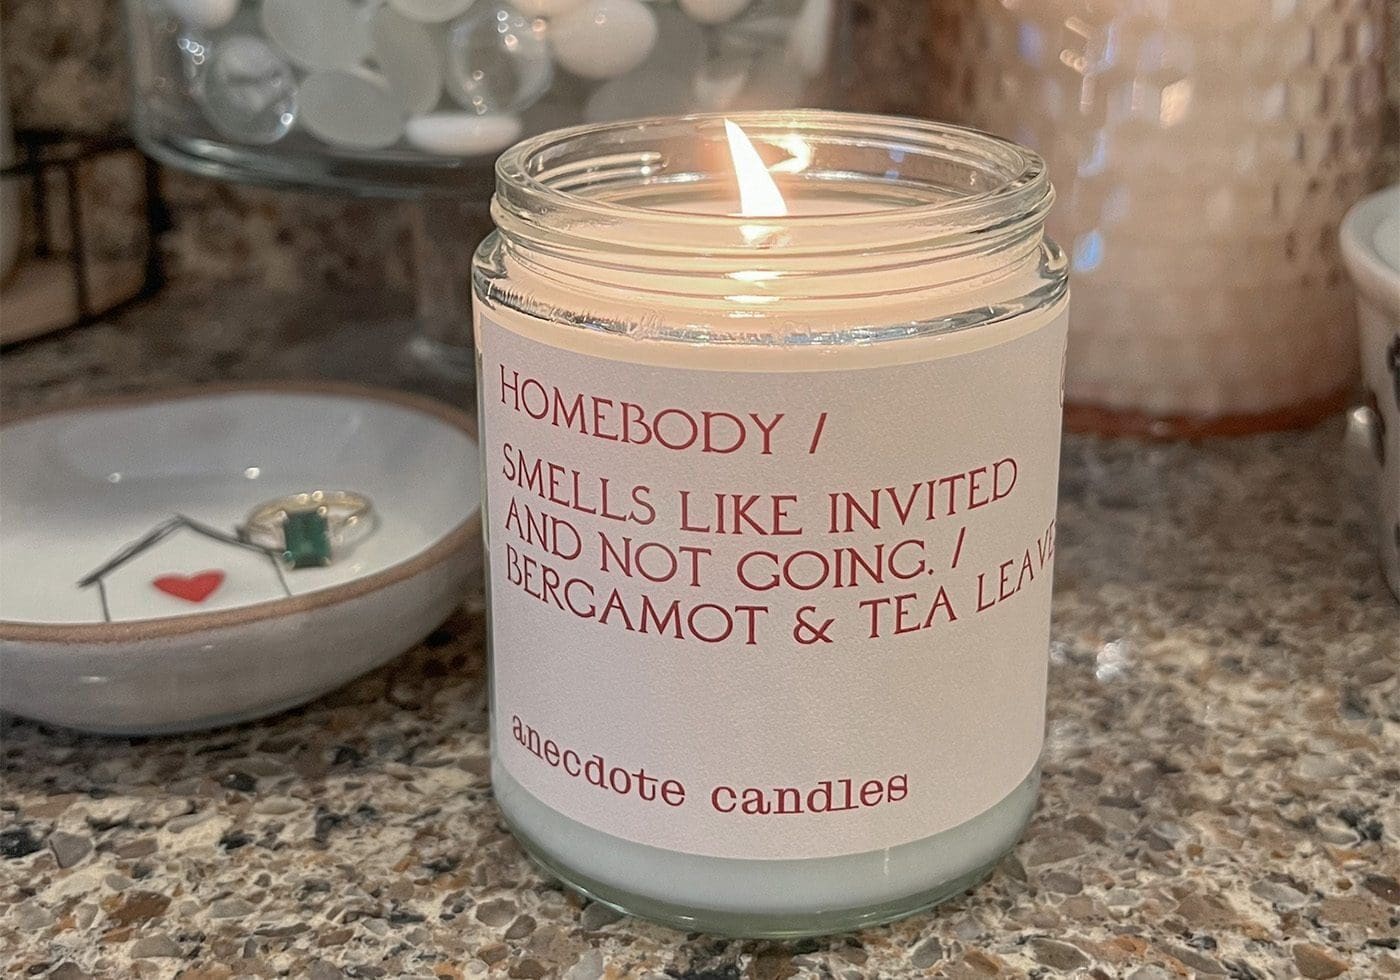 Homebody Candle from Anecdote Candles